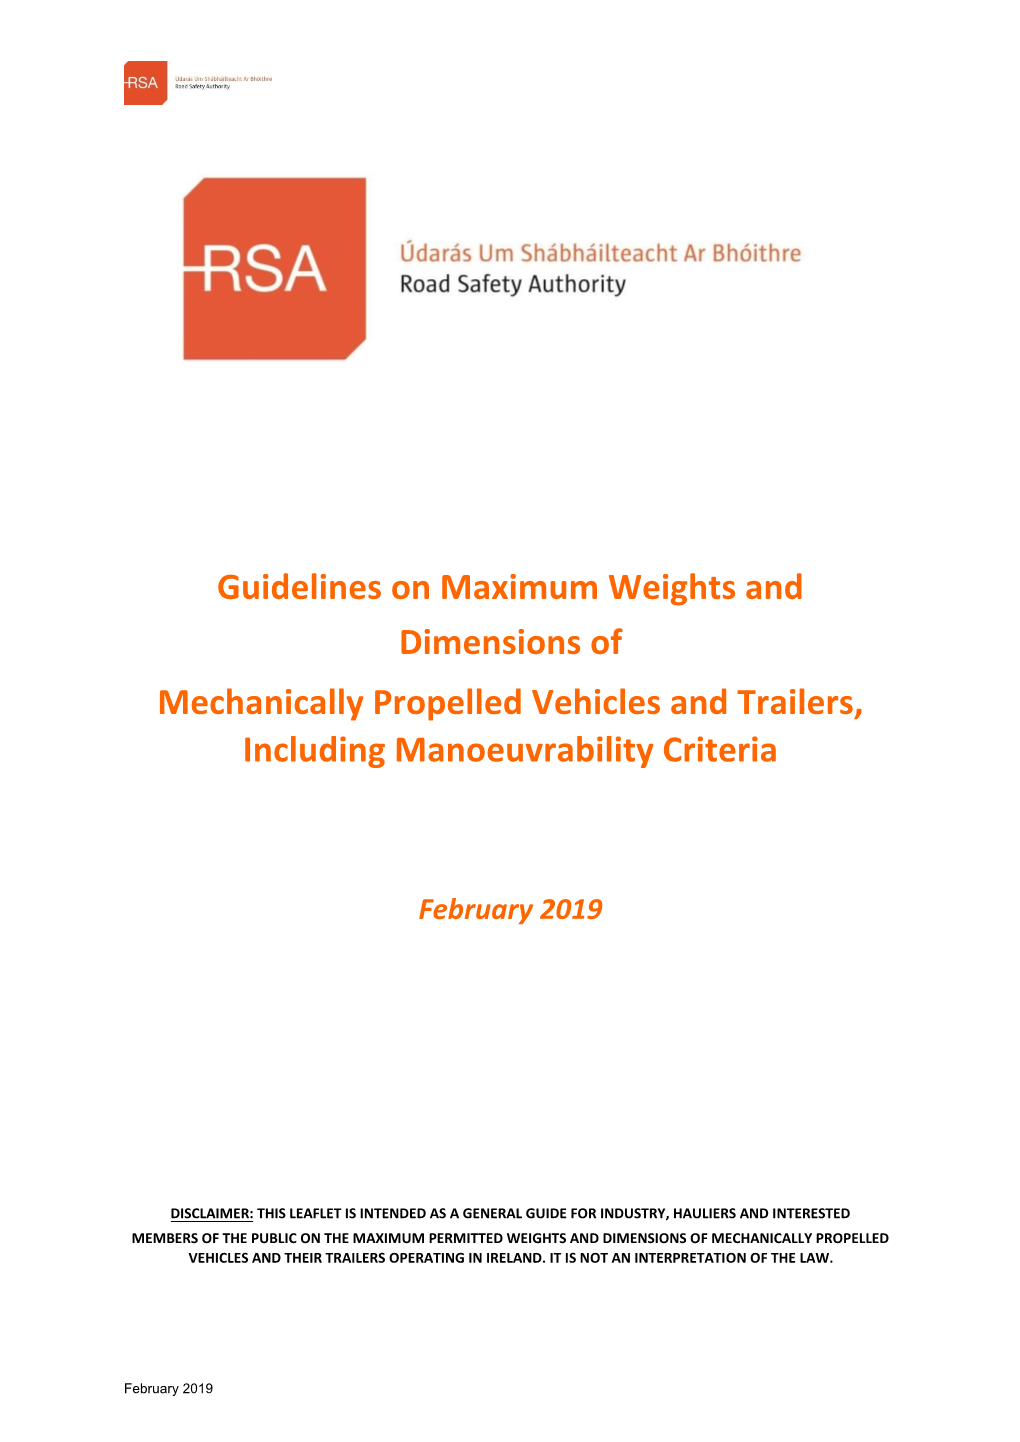 Guidelines on Maximum Weights and Dimensions of Mechanically Propelled Vehicles and Trailers, Including Manoeuvrability Criteria